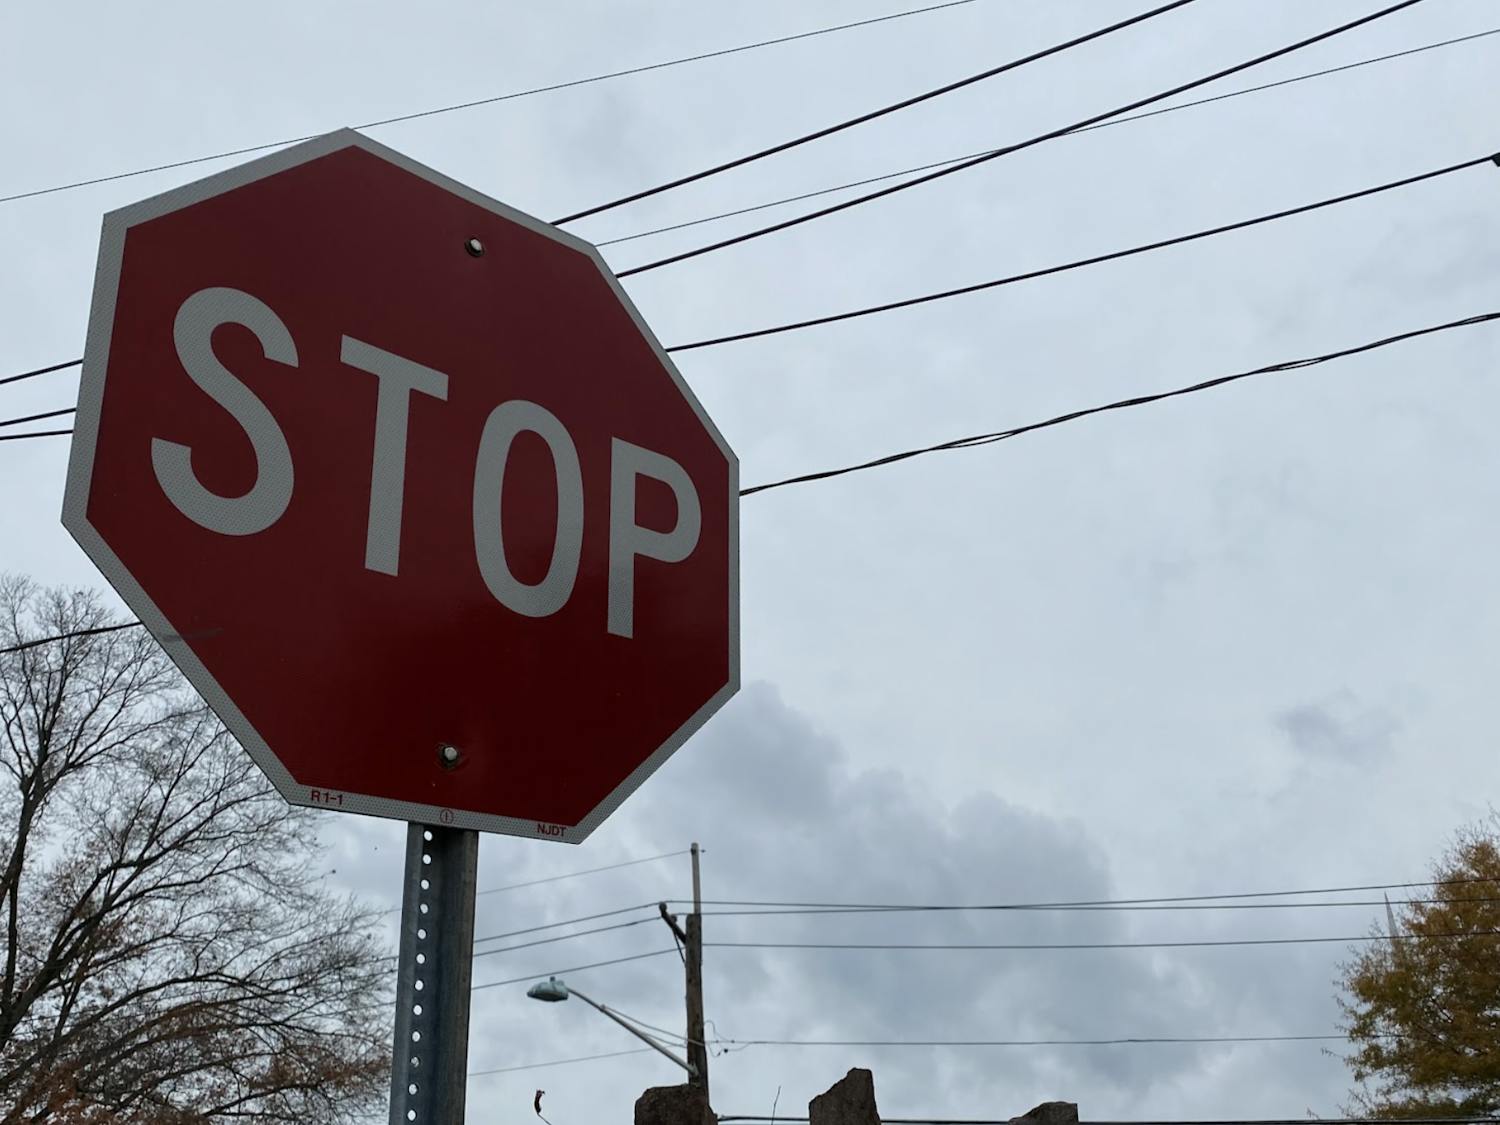 Over 30 street signs have been stolen from the local Ewing area since August, and Campus Police and the Ewing Police Department are working together to return them (Sean Leonard / News Editor).